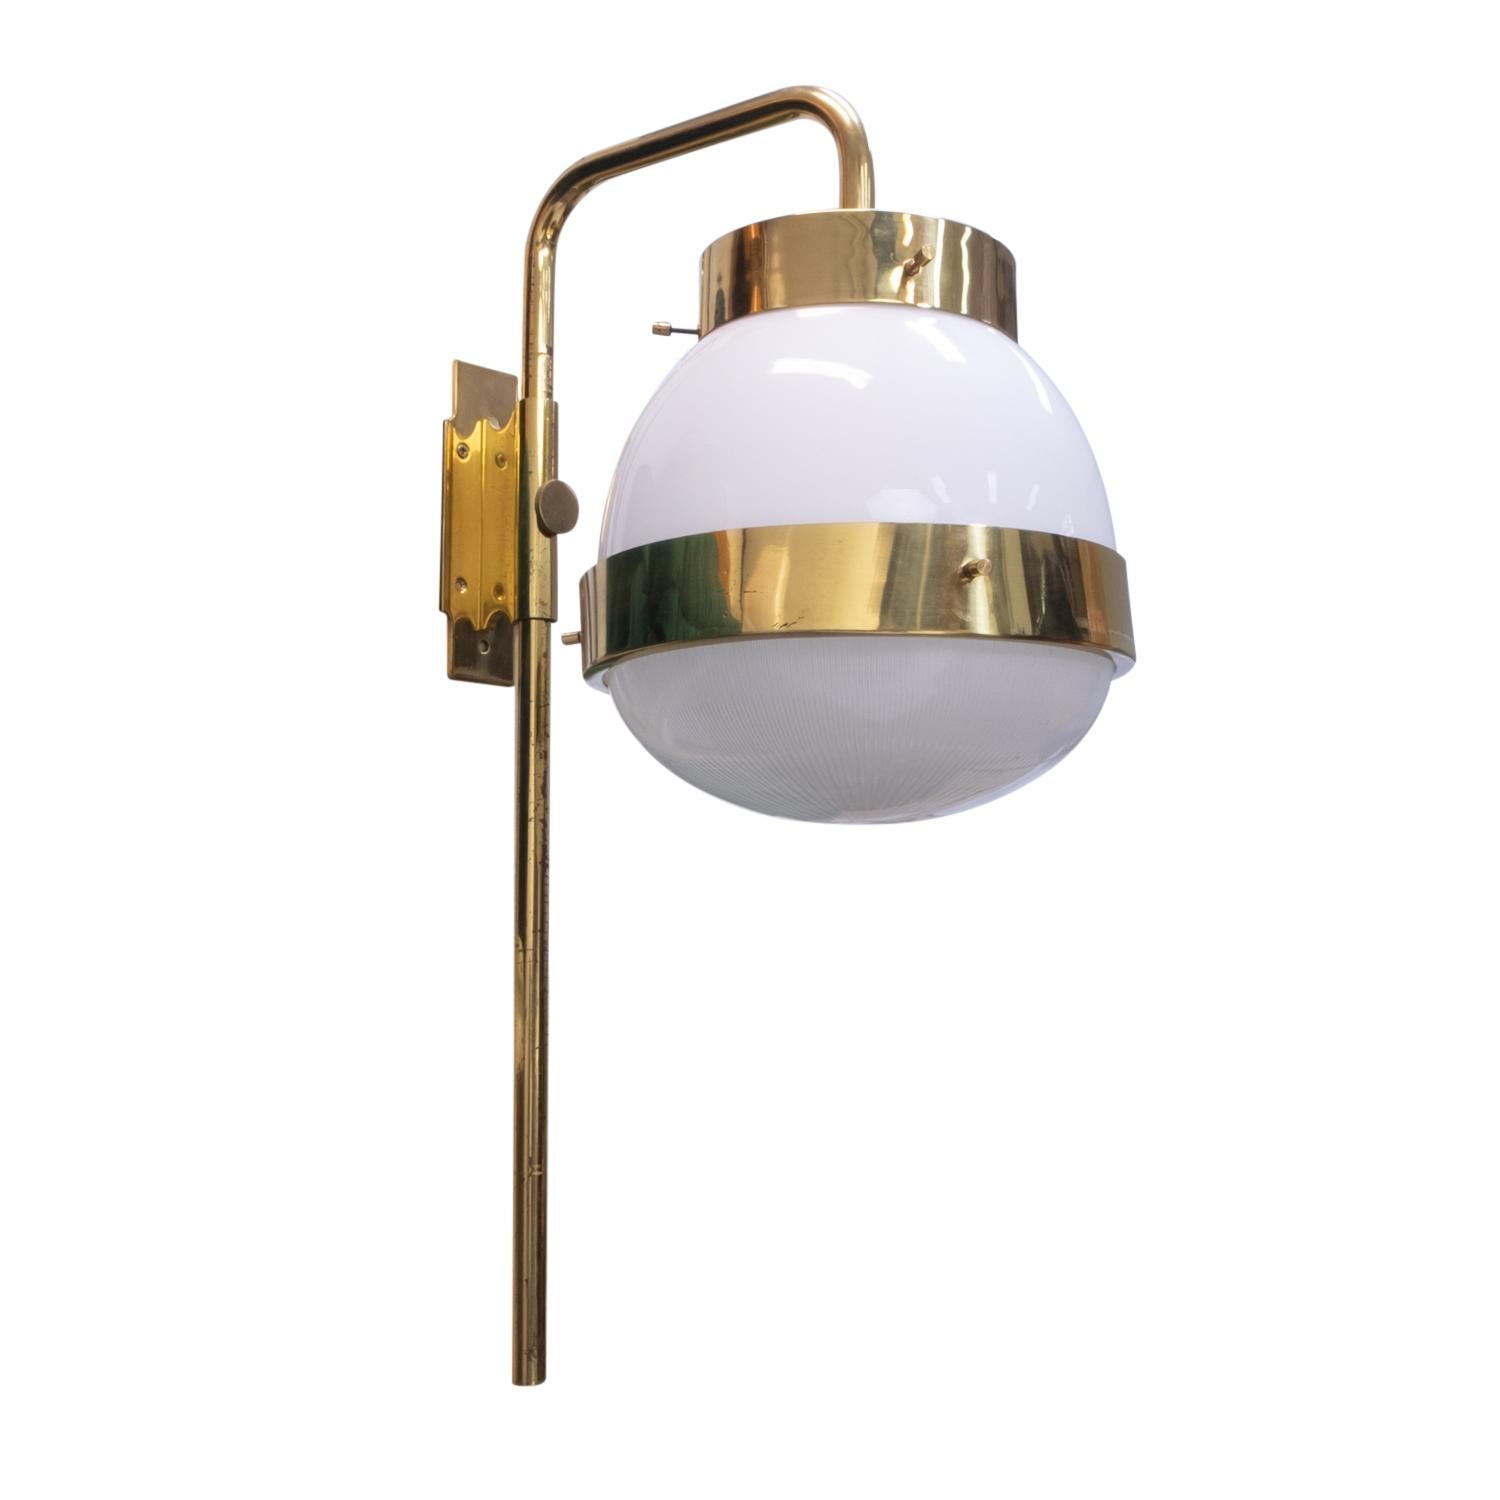 A “Delta” wall lamp by Sergio Mazza for Artemide.

Italian designer Sergio Mazza (1931) has received several awards for his work during his career. This includes the well-known Compasso d’Oro (1960) for his Delta lamp that was designed for